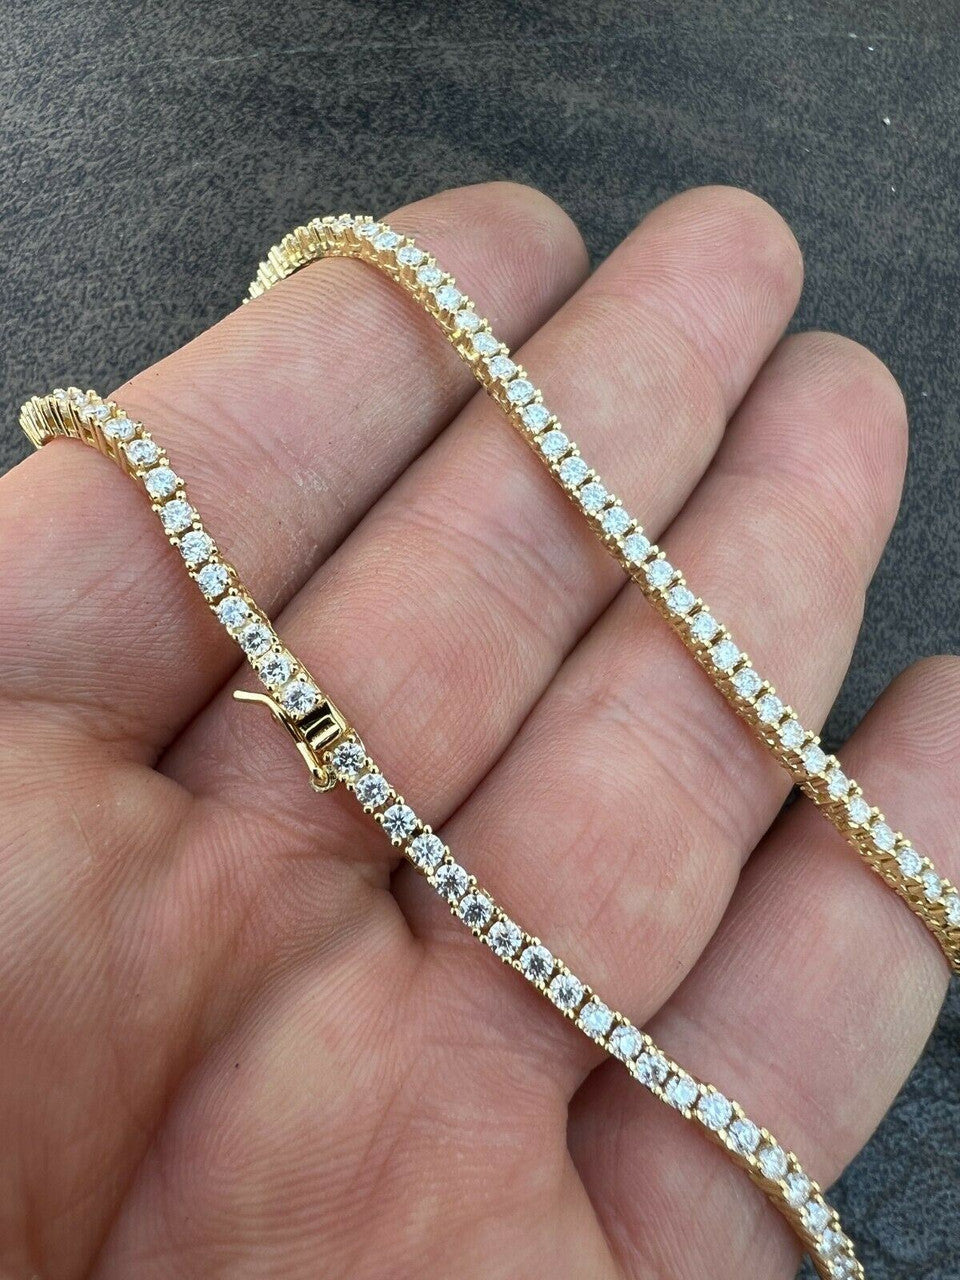 2mm 14k Gold Moissanite Diamond Micro Tennis Chain Necklace 925 Sterling Silver Chain